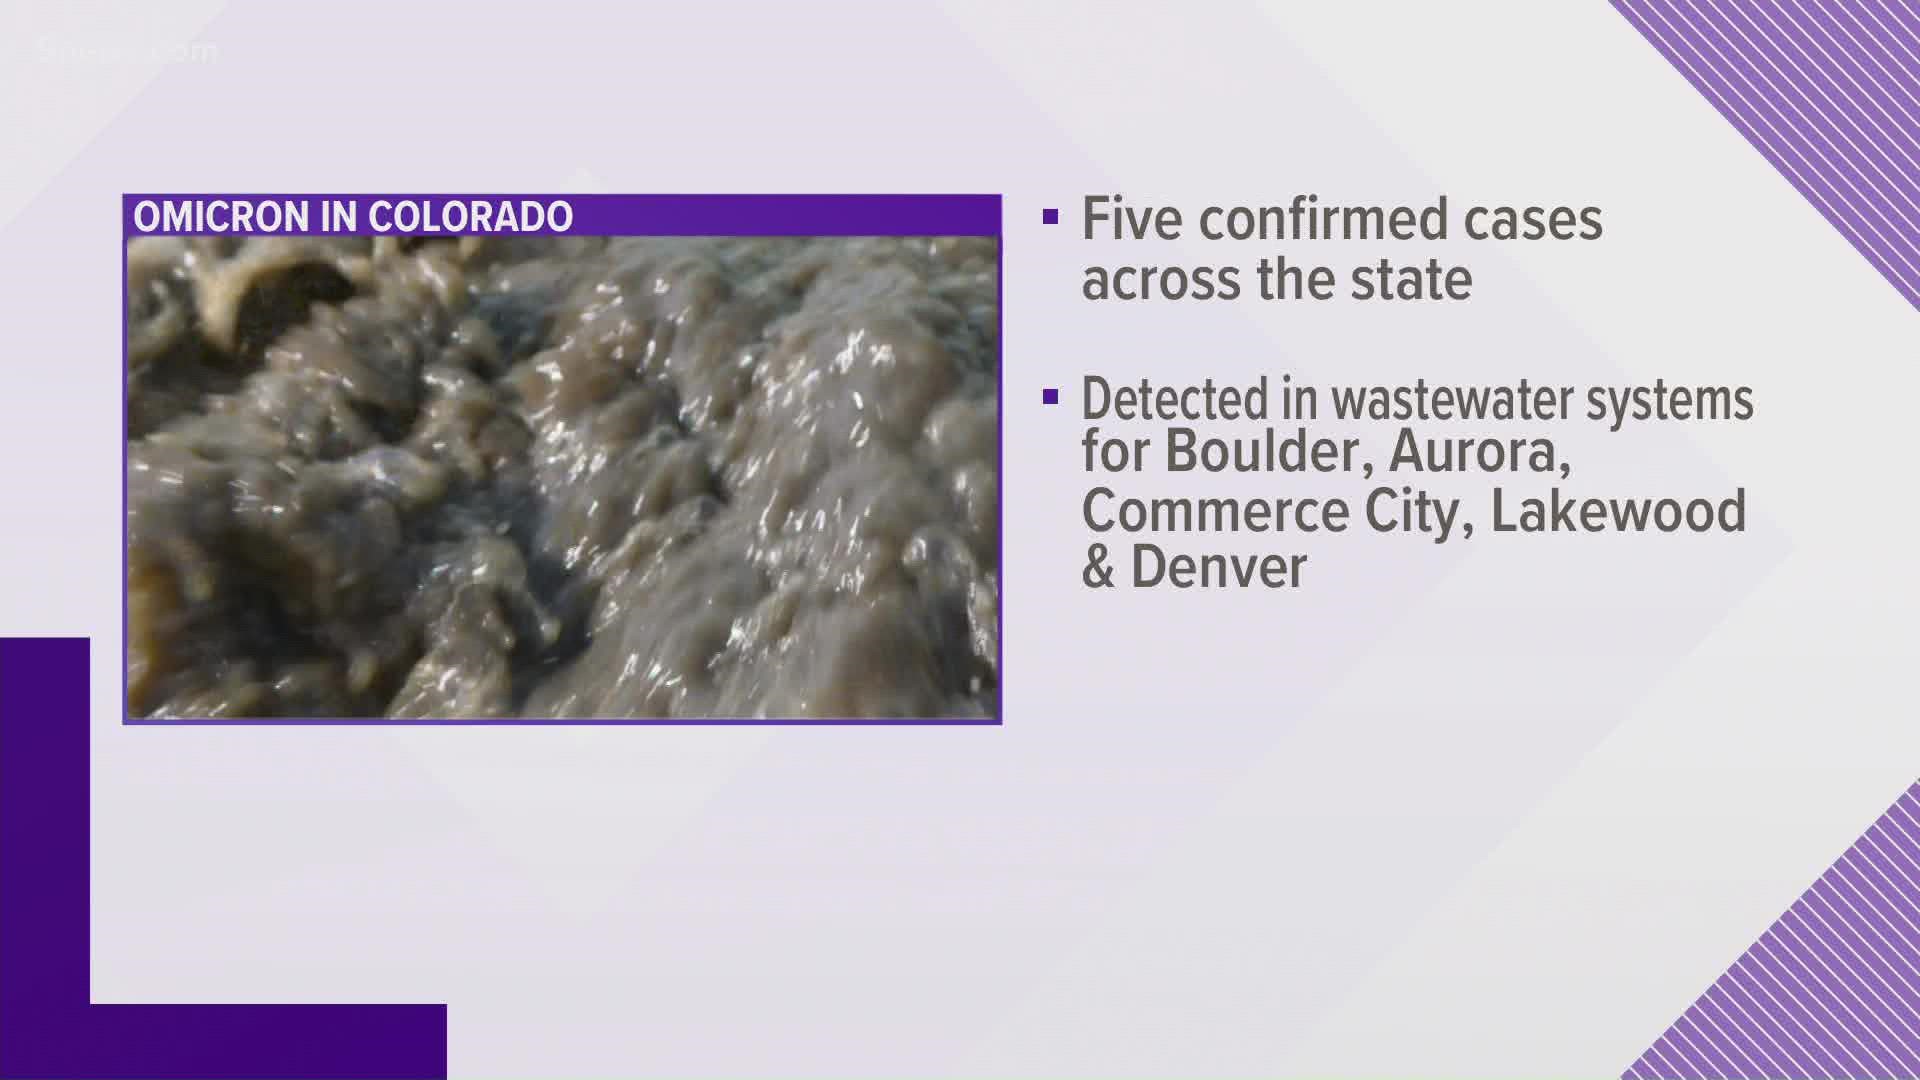 The Omicron variant was detected in multiple wastewater systems in the Denver Metro area, health leaders said Thursday.